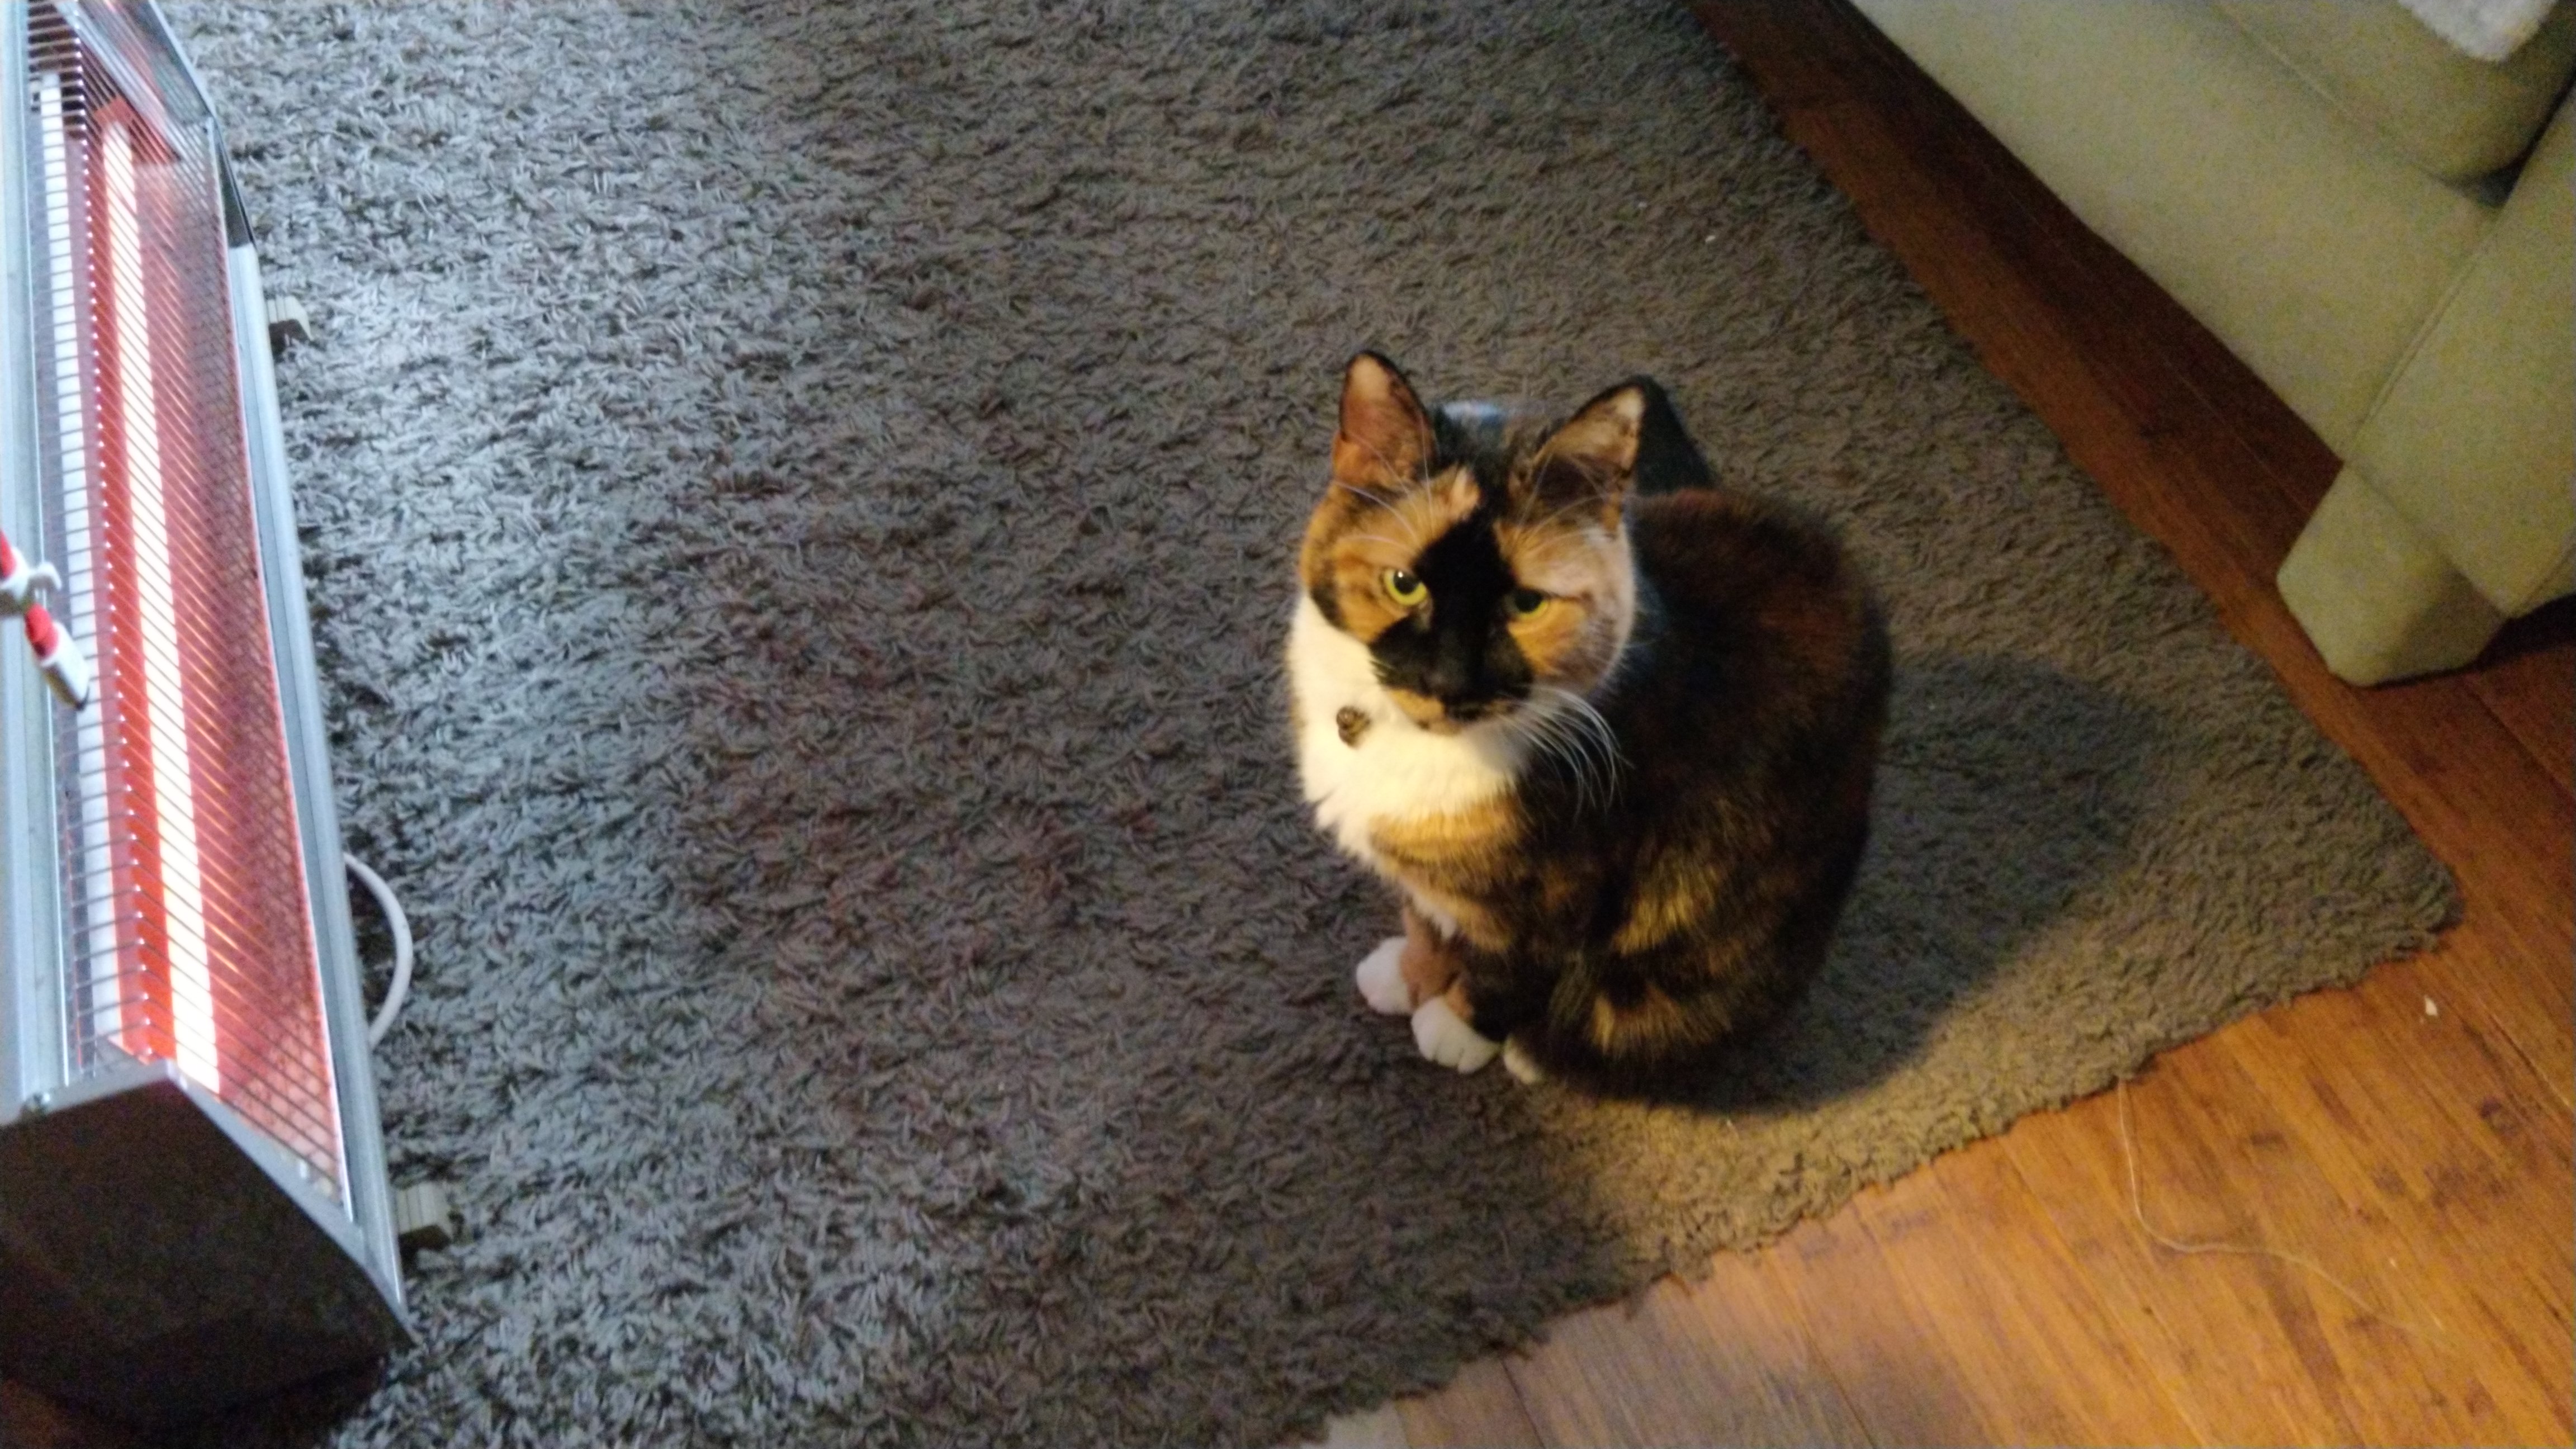 calico cat sitting upright on grey rug in front of a long warm heater, staring resolutely at the viewer